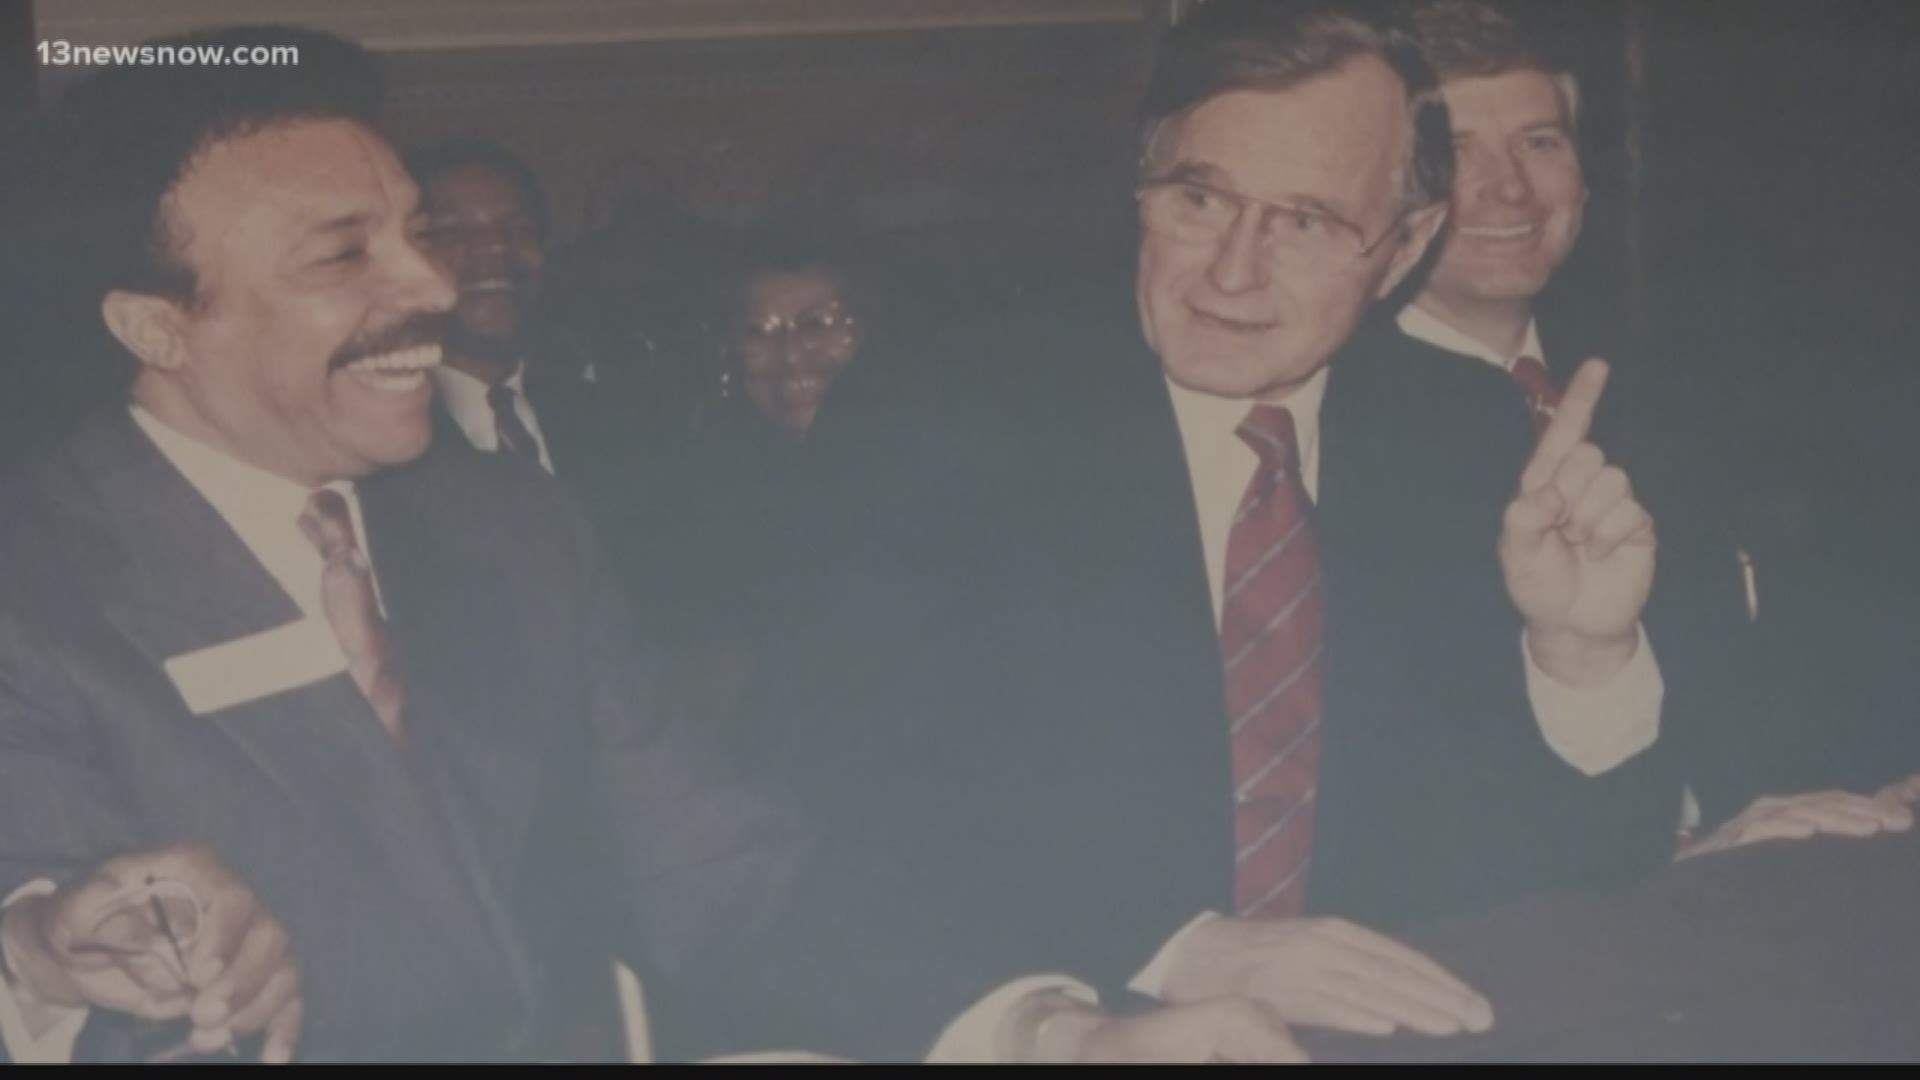 The President of Hampton University had a working relationship with President George H.W. Bush.